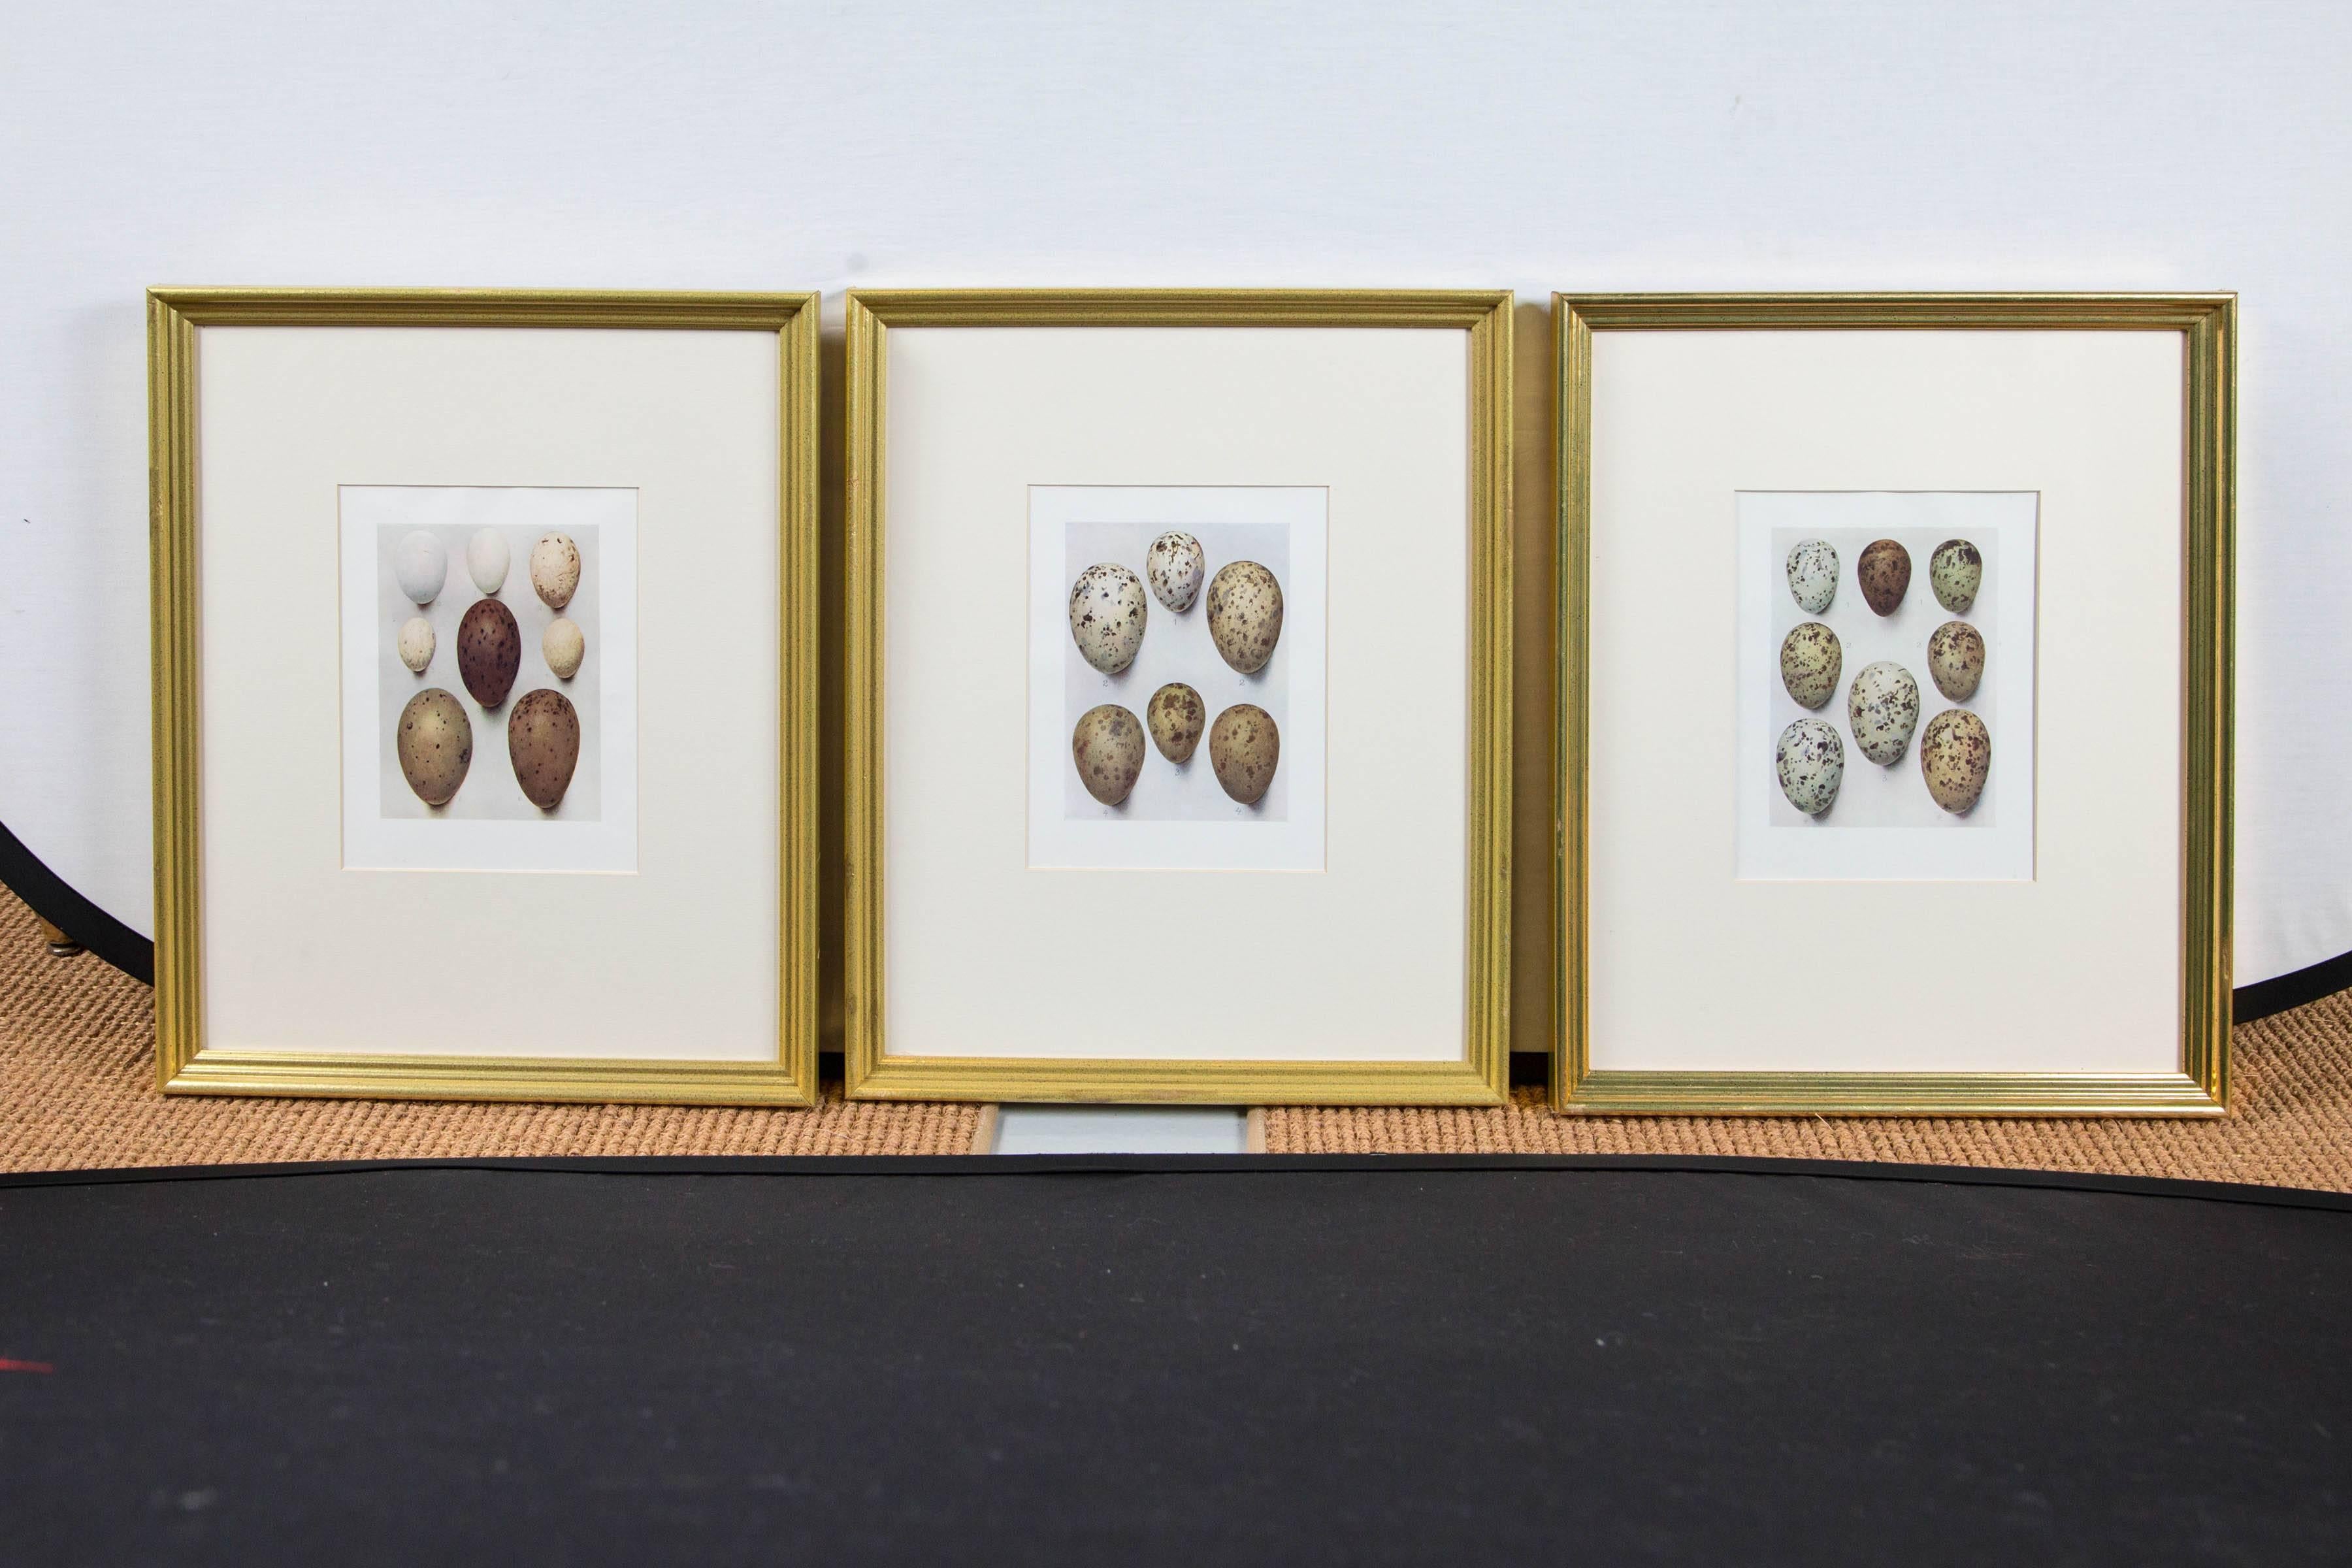 Set of three framed bird's eggs lithographs, England, circa 1900 by H. Gronvold (1858-1940.) Henrik Gronvold was a Danish naturalist and artist specializing in the study of birds. Wonderfully detailed depiction of rare bird eggs. Nicely framed and